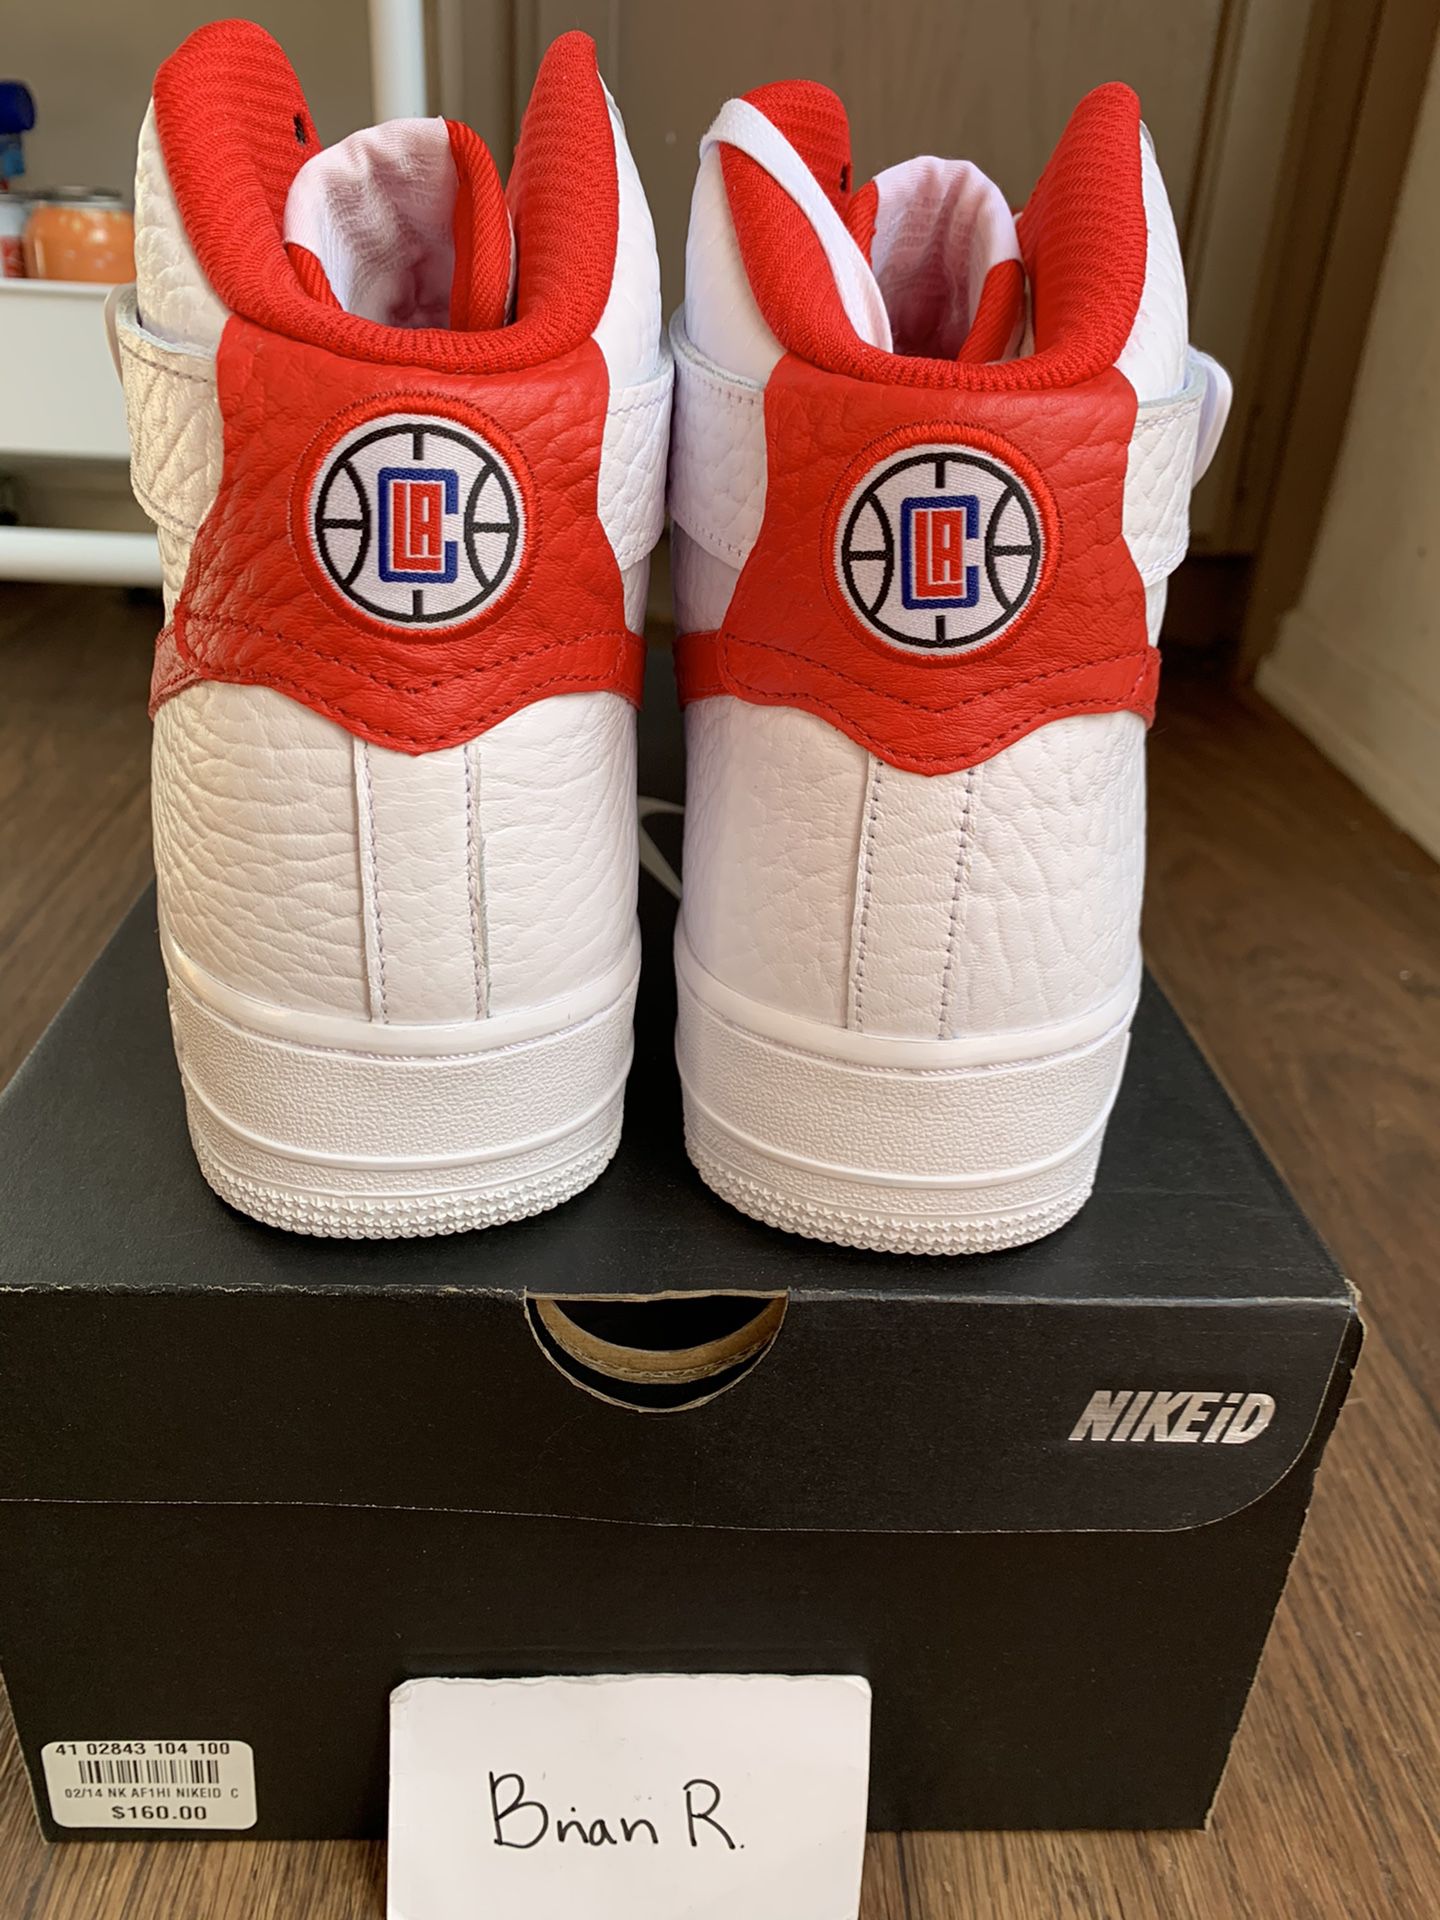 Nike Air Force 1 LA Clippers men’s shoe size 10 Brand New